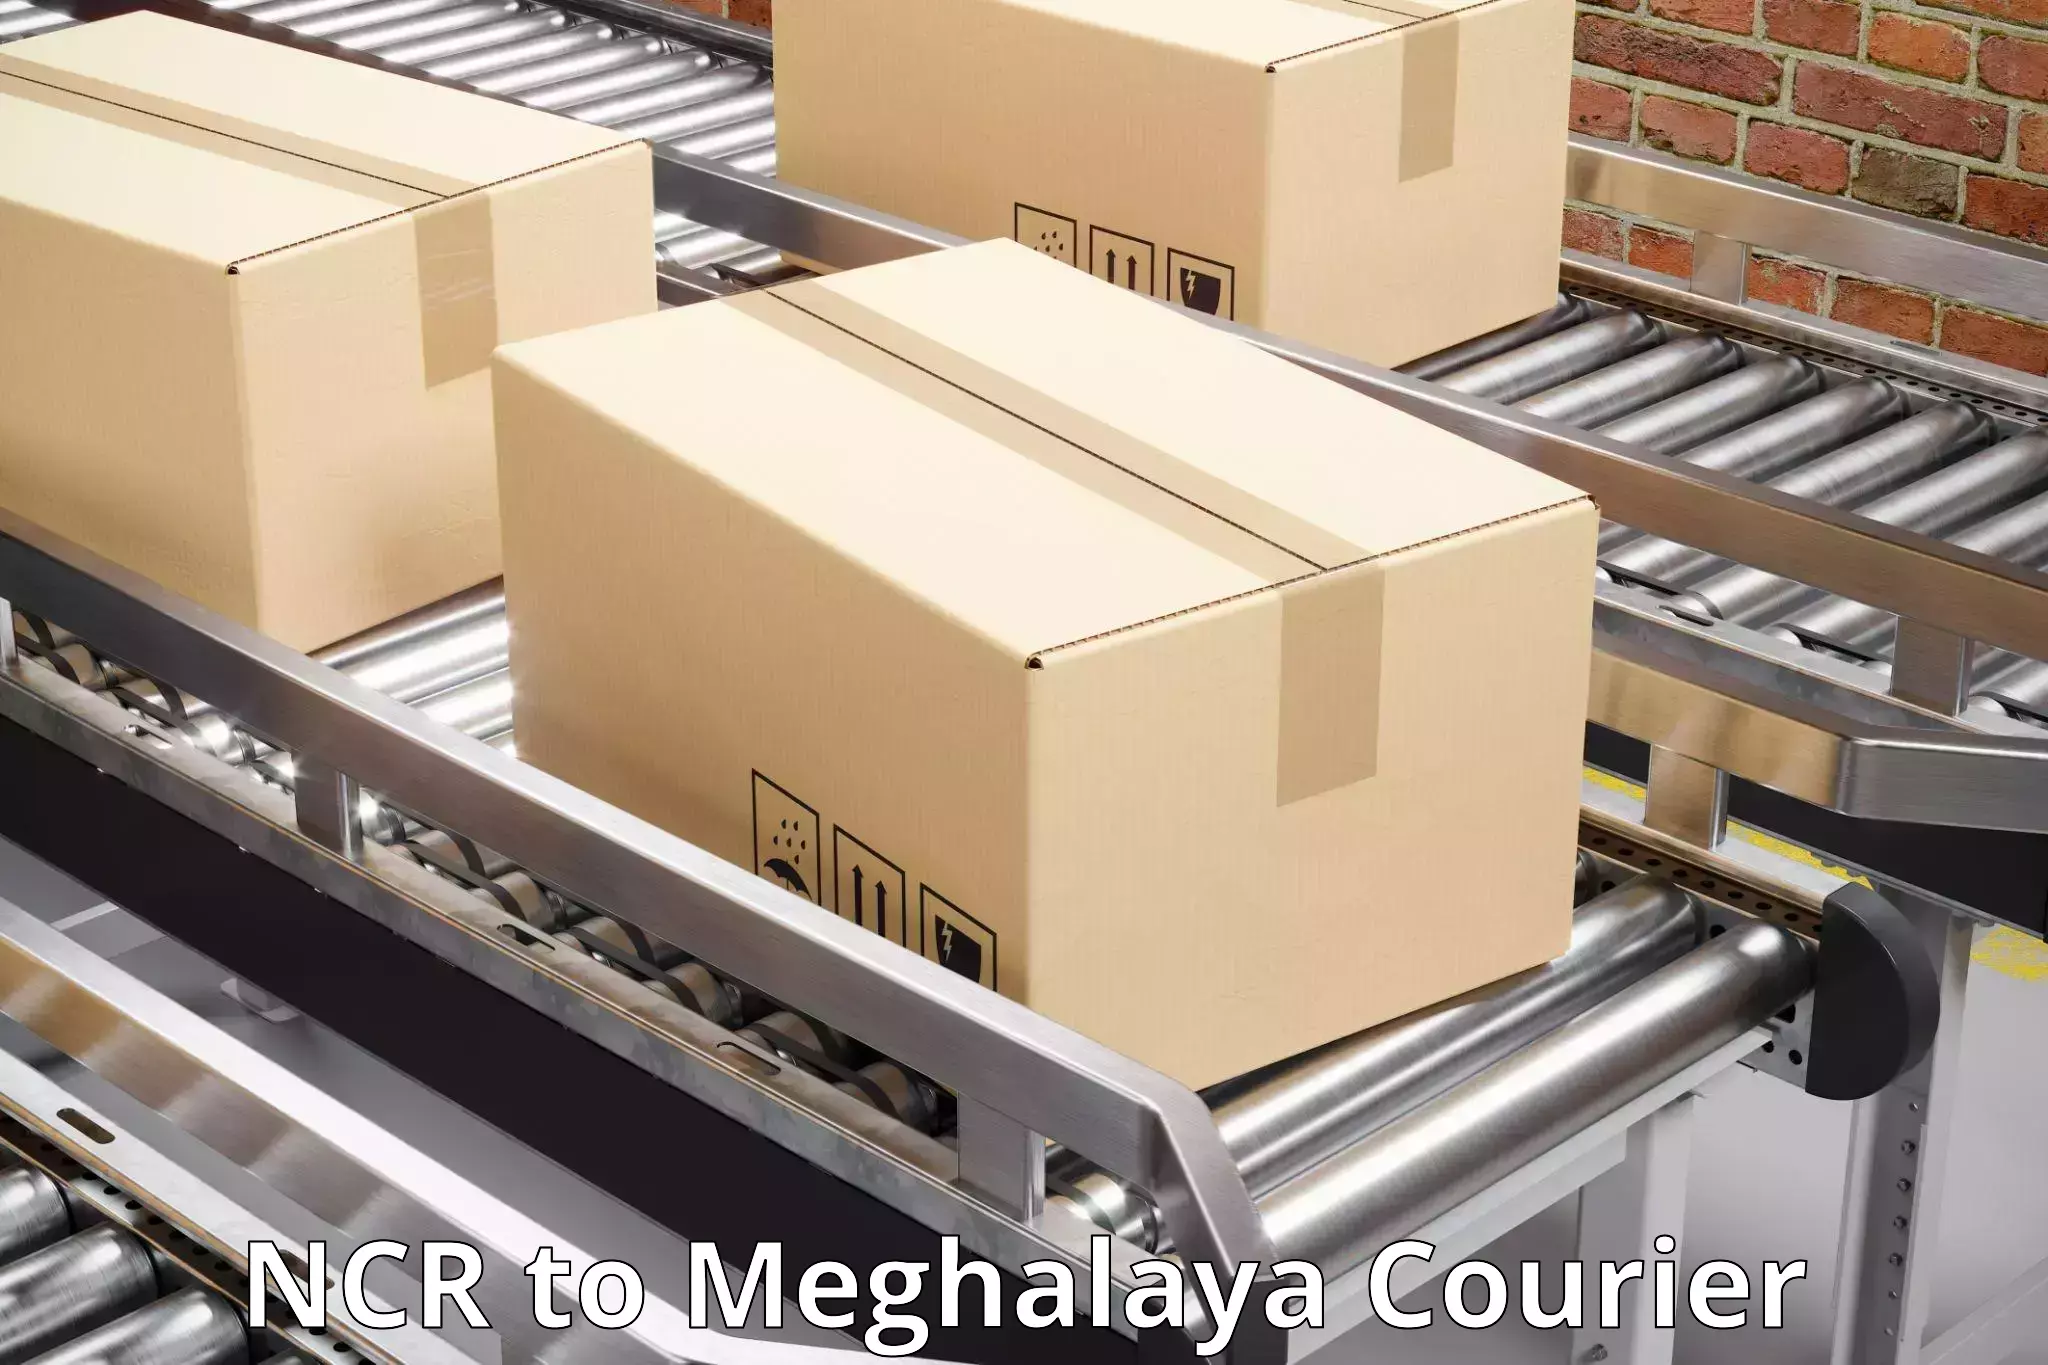 Courier service partnerships NCR to Dkhiah West